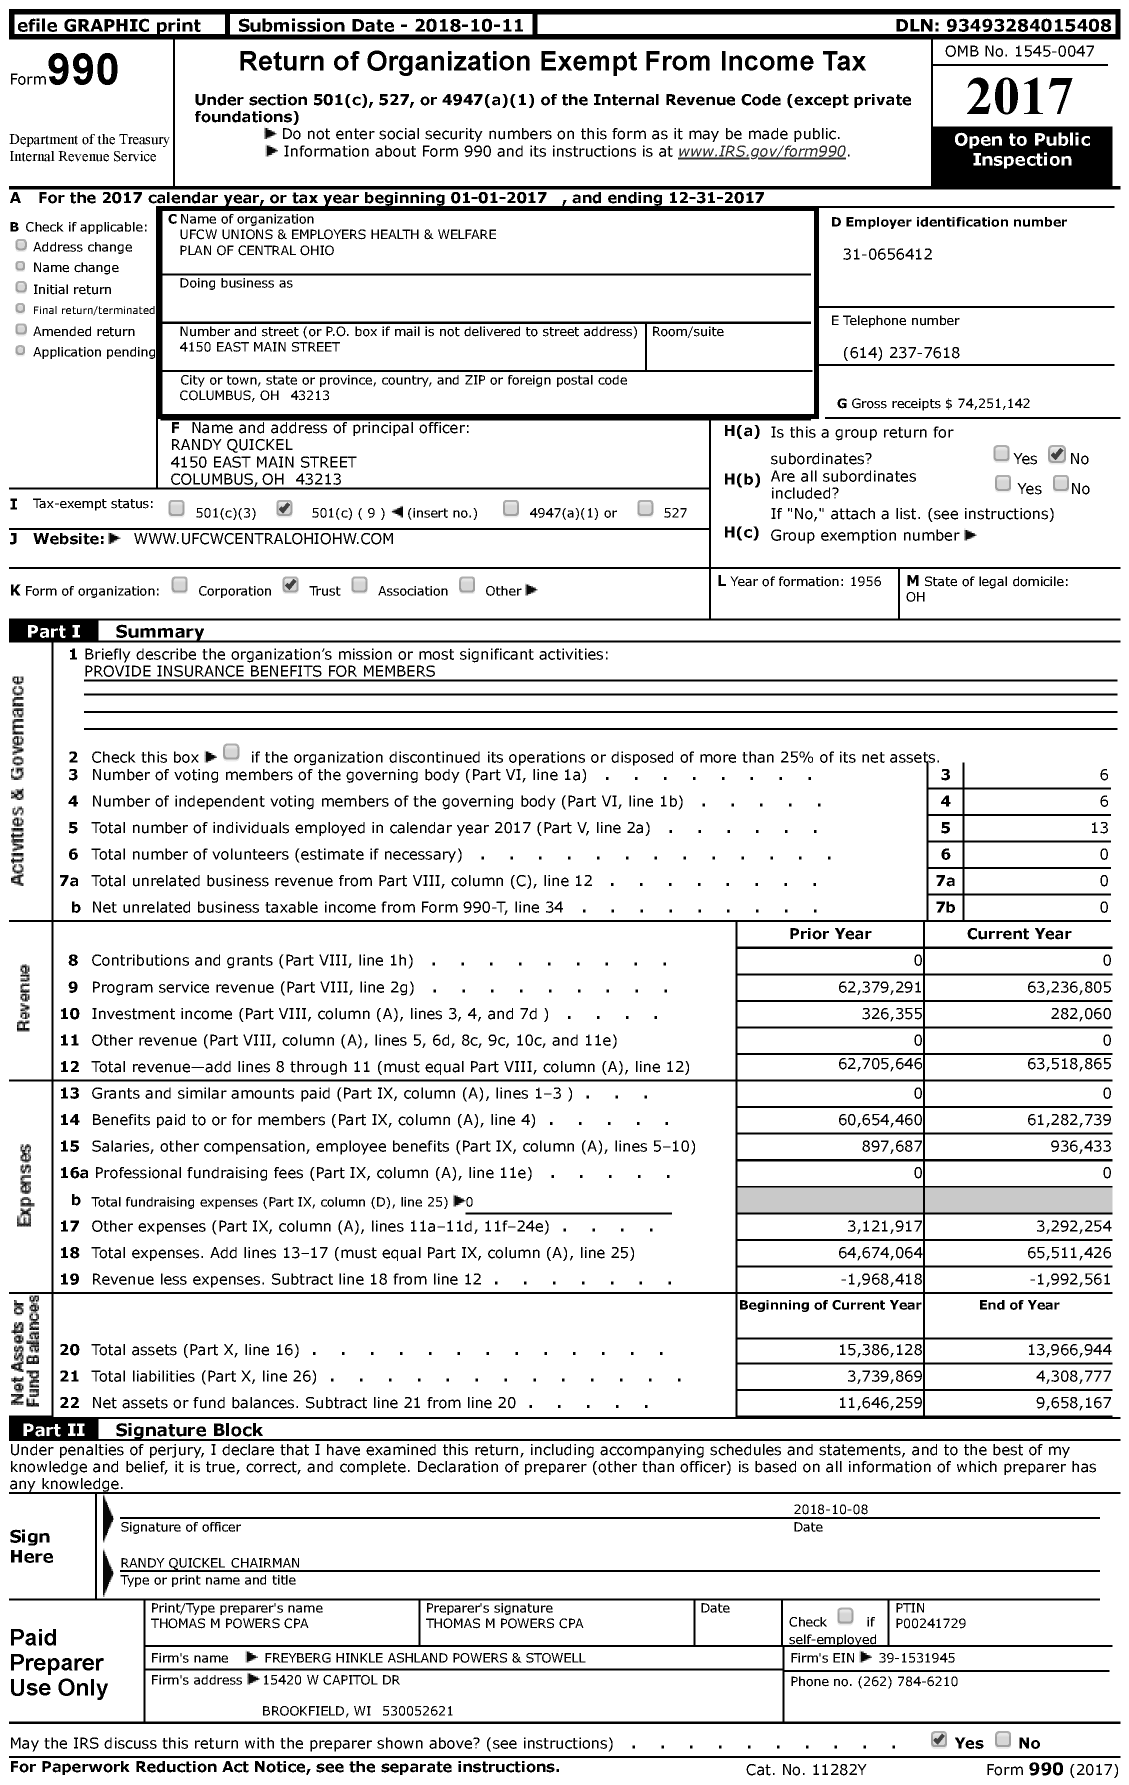 Image of first page of 2017 Form 990 for Ufcw Unions and Employers Health and Welfare Plan of Central Ohio